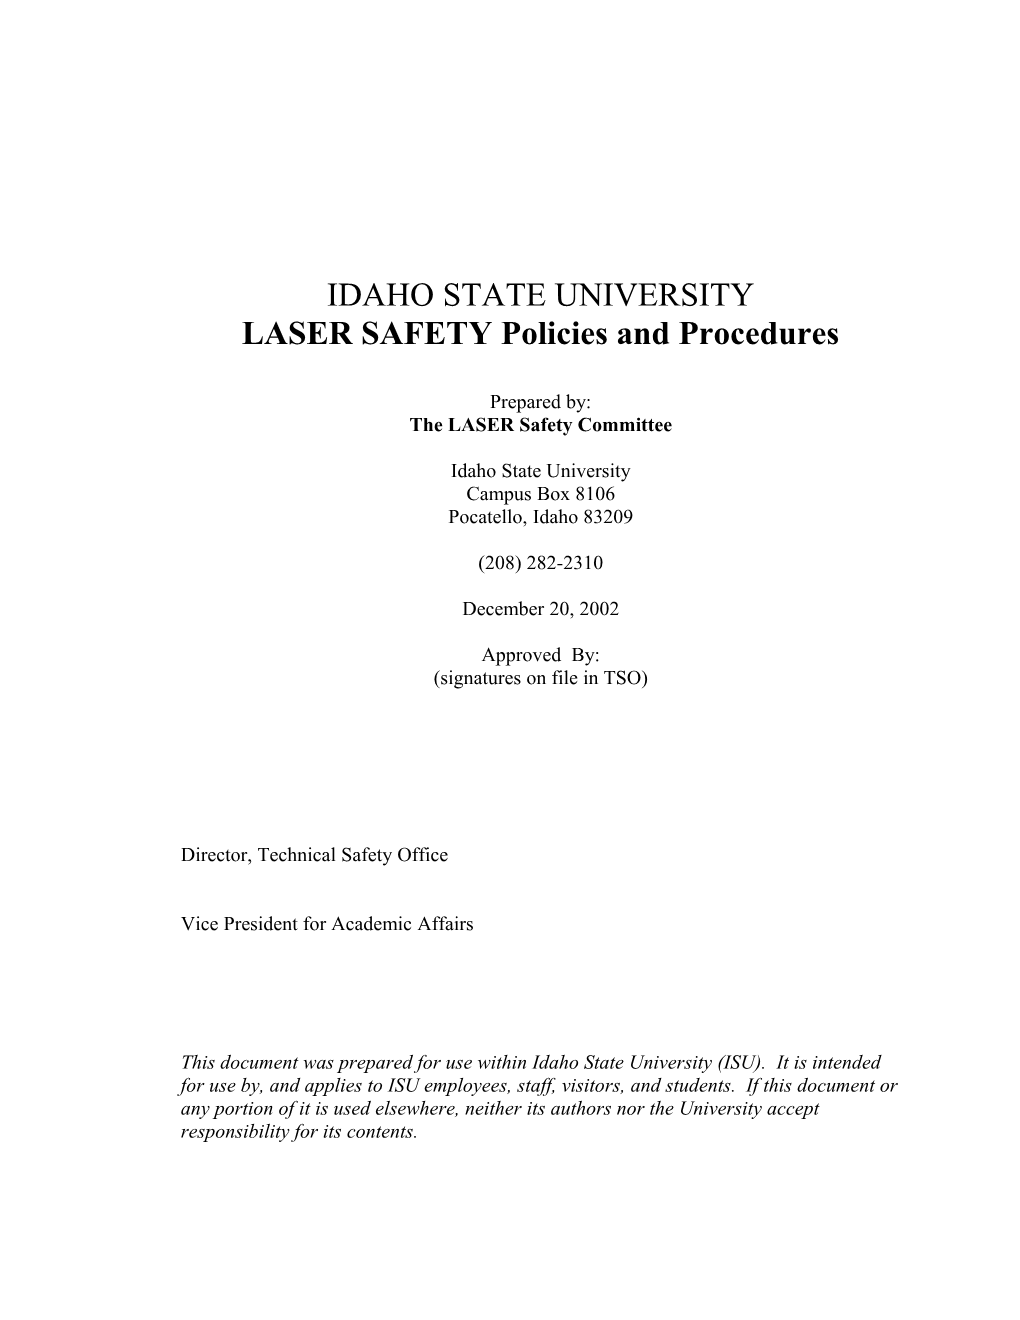 LASER SAFETY Policies and Procedures